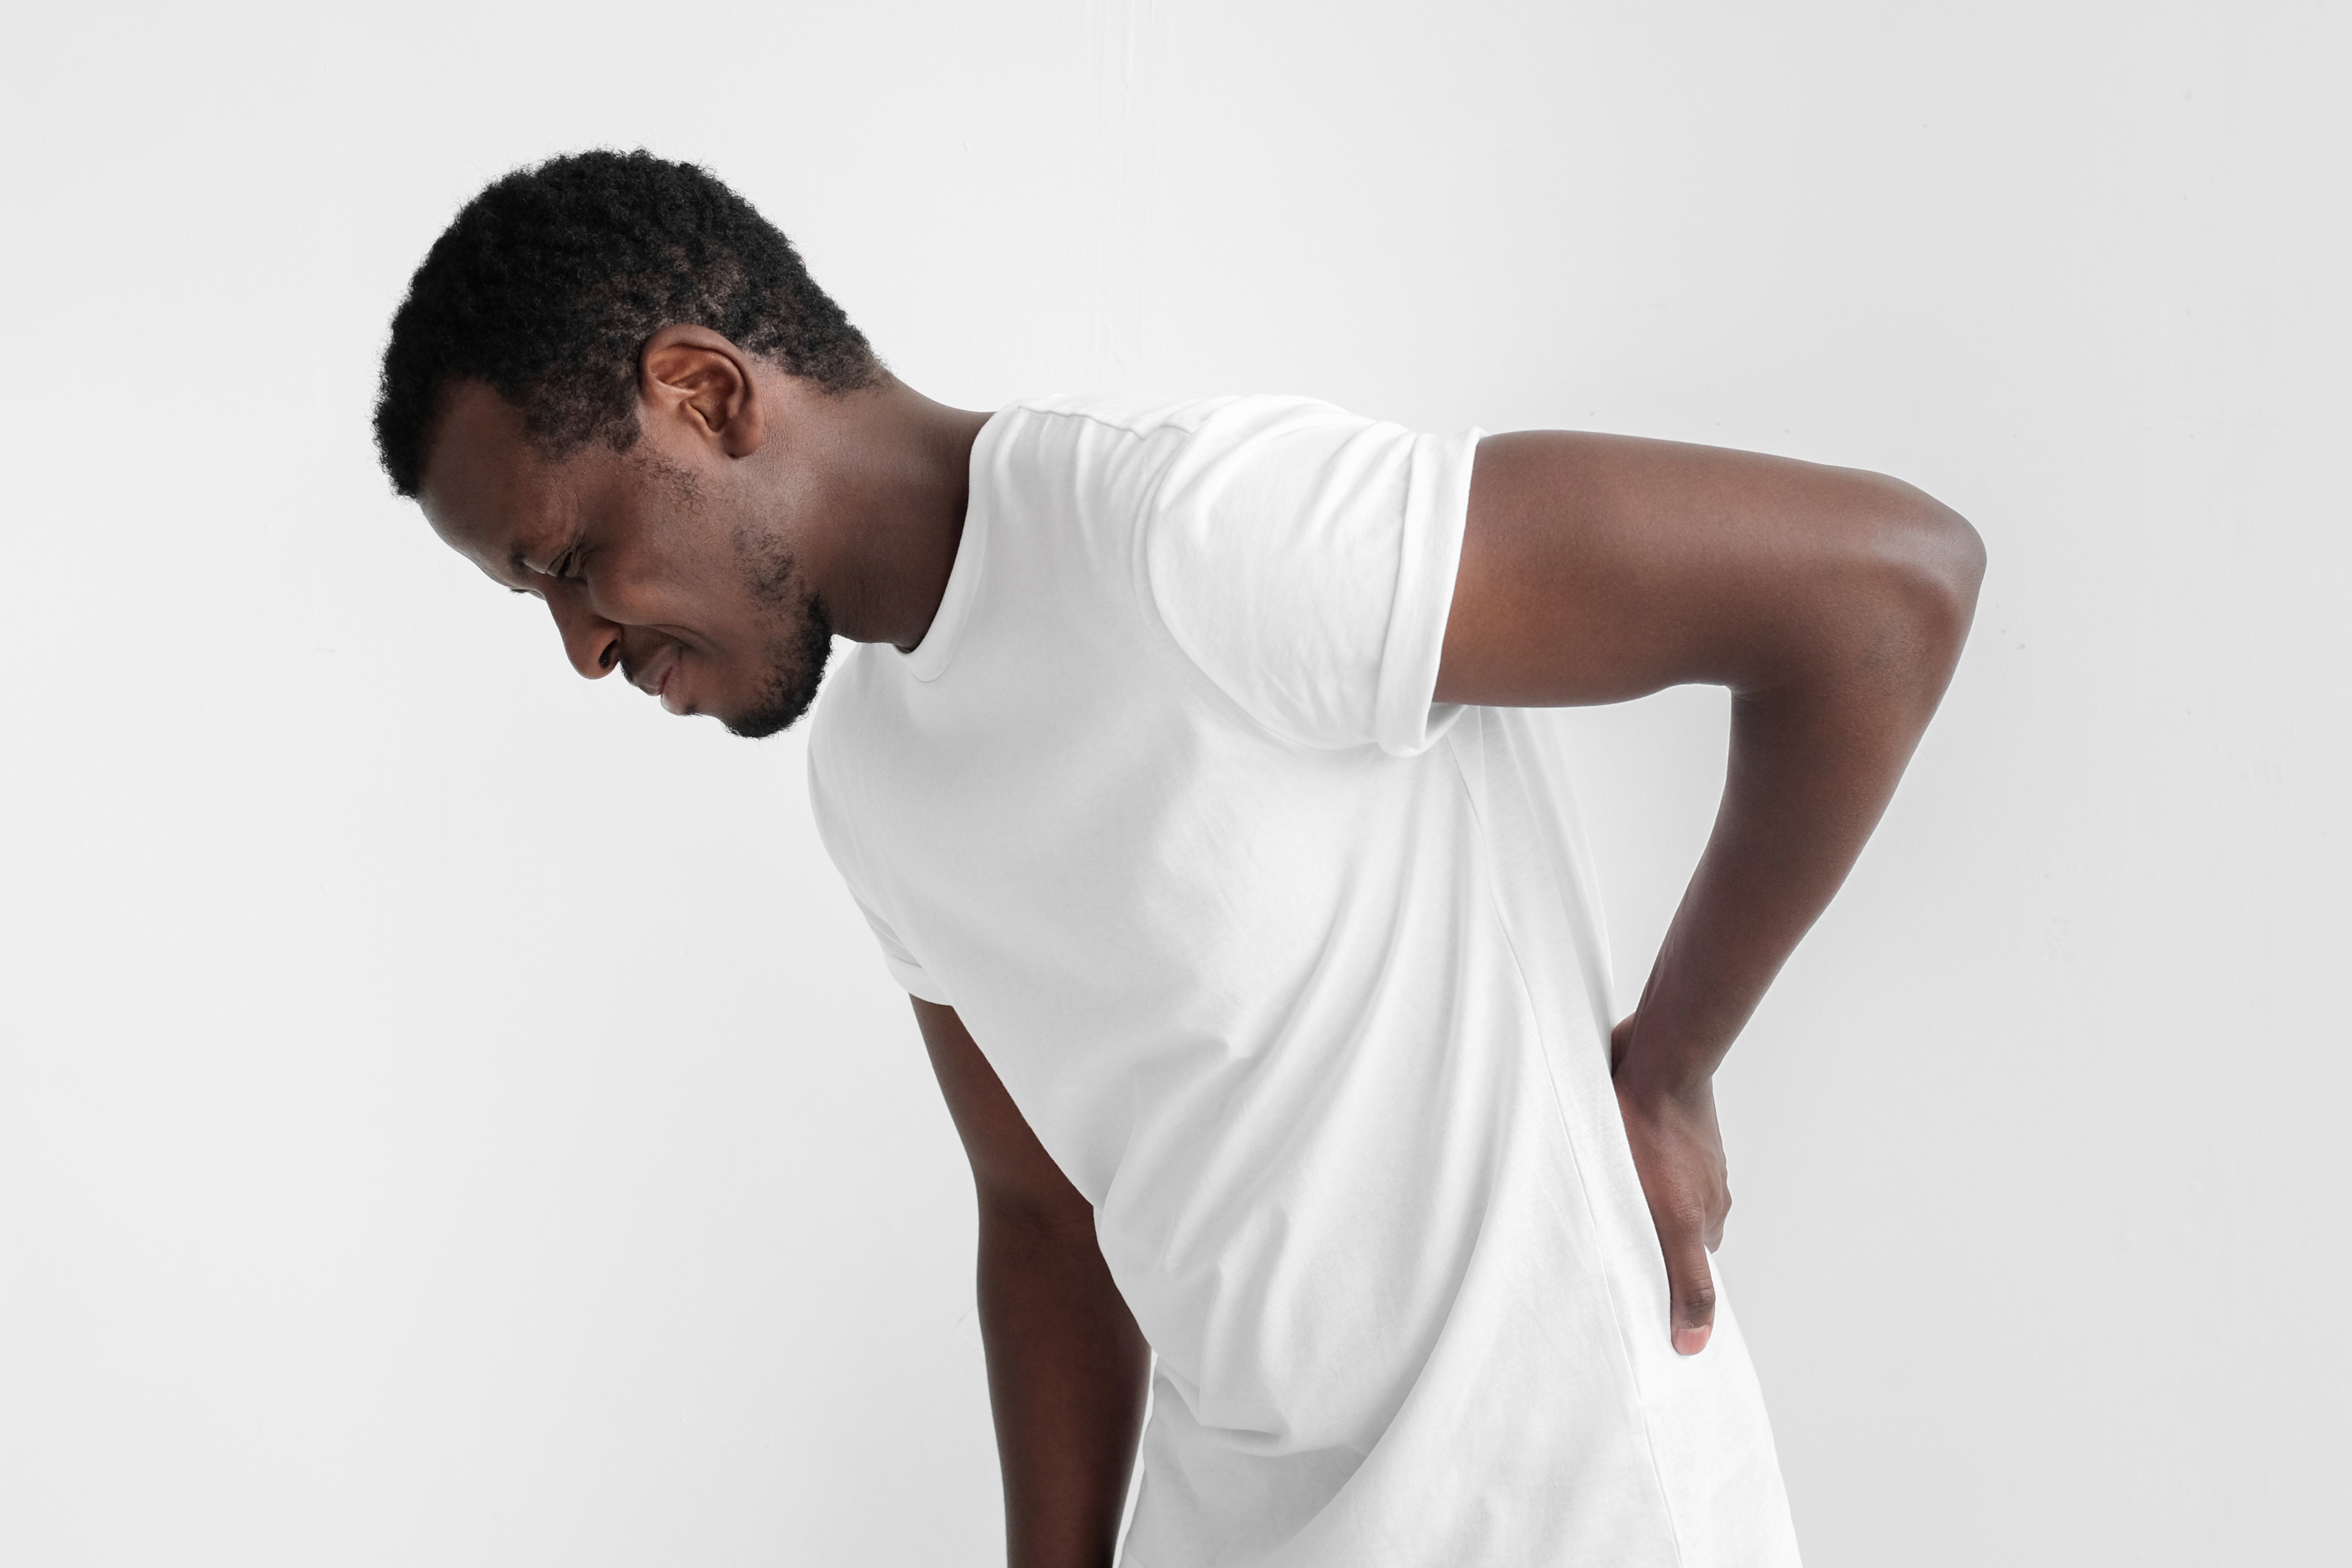 How Can a Chiropractor Treat Herniated Disc Pain?